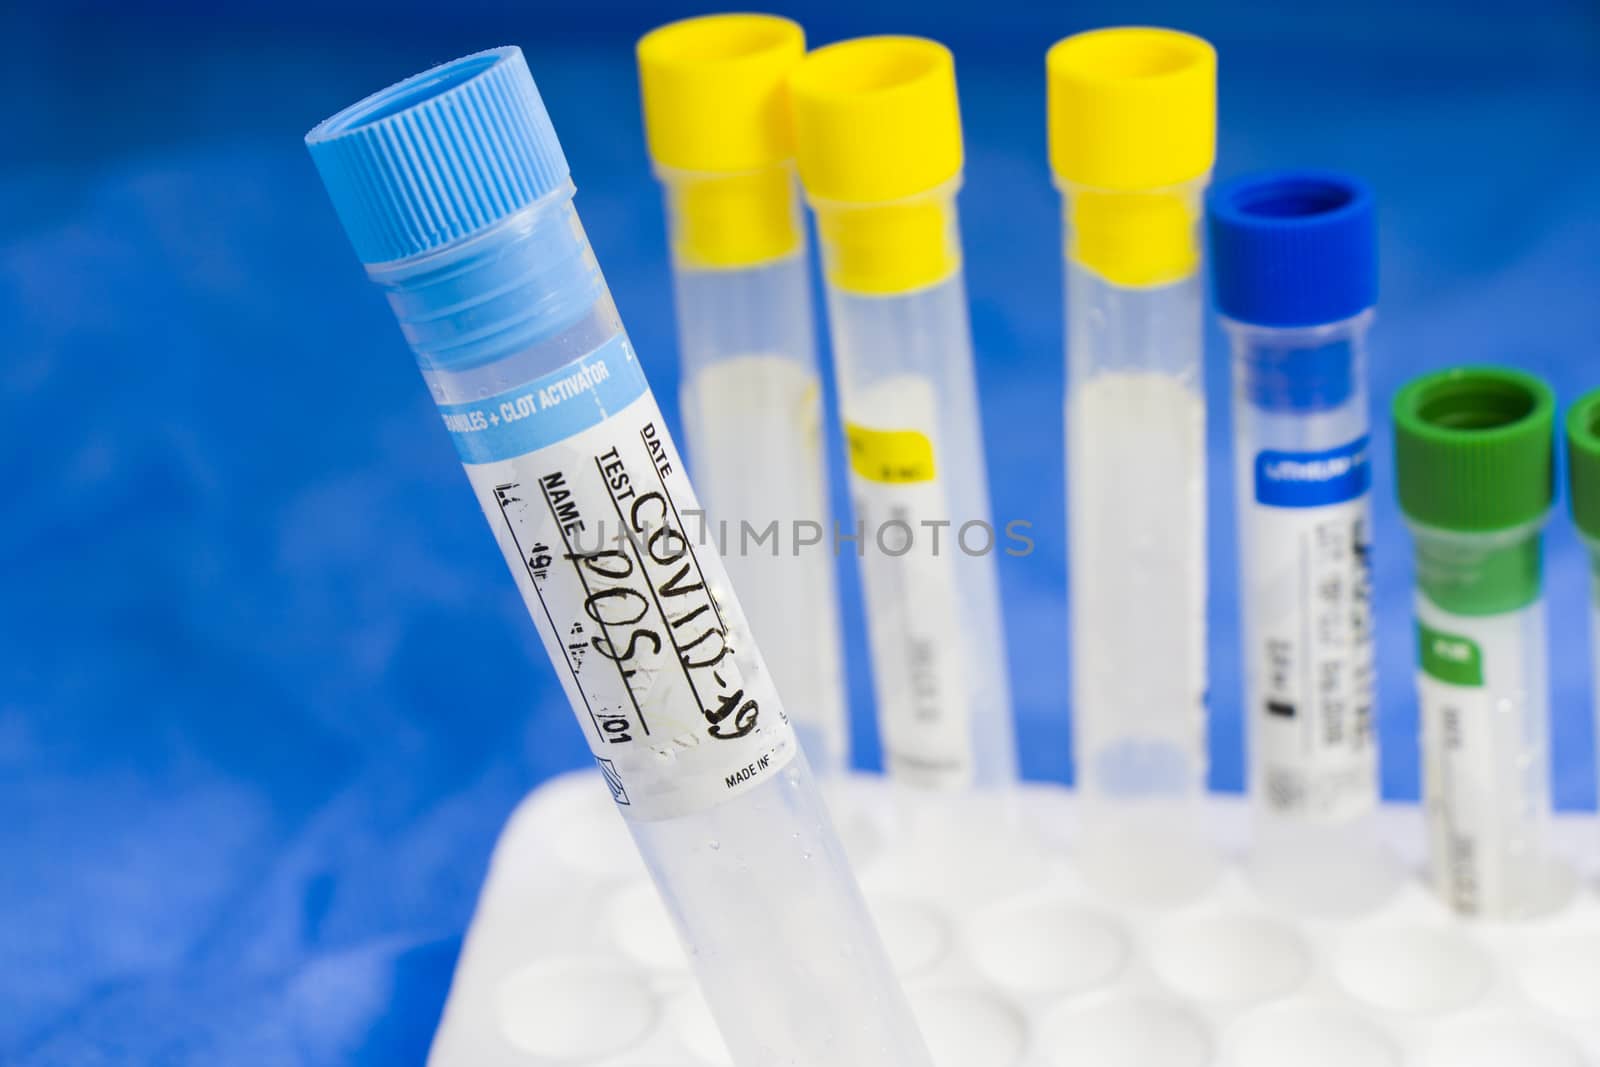 Corona virus and Covid-19 positive test samples. Tubes of blood. by Taidundua